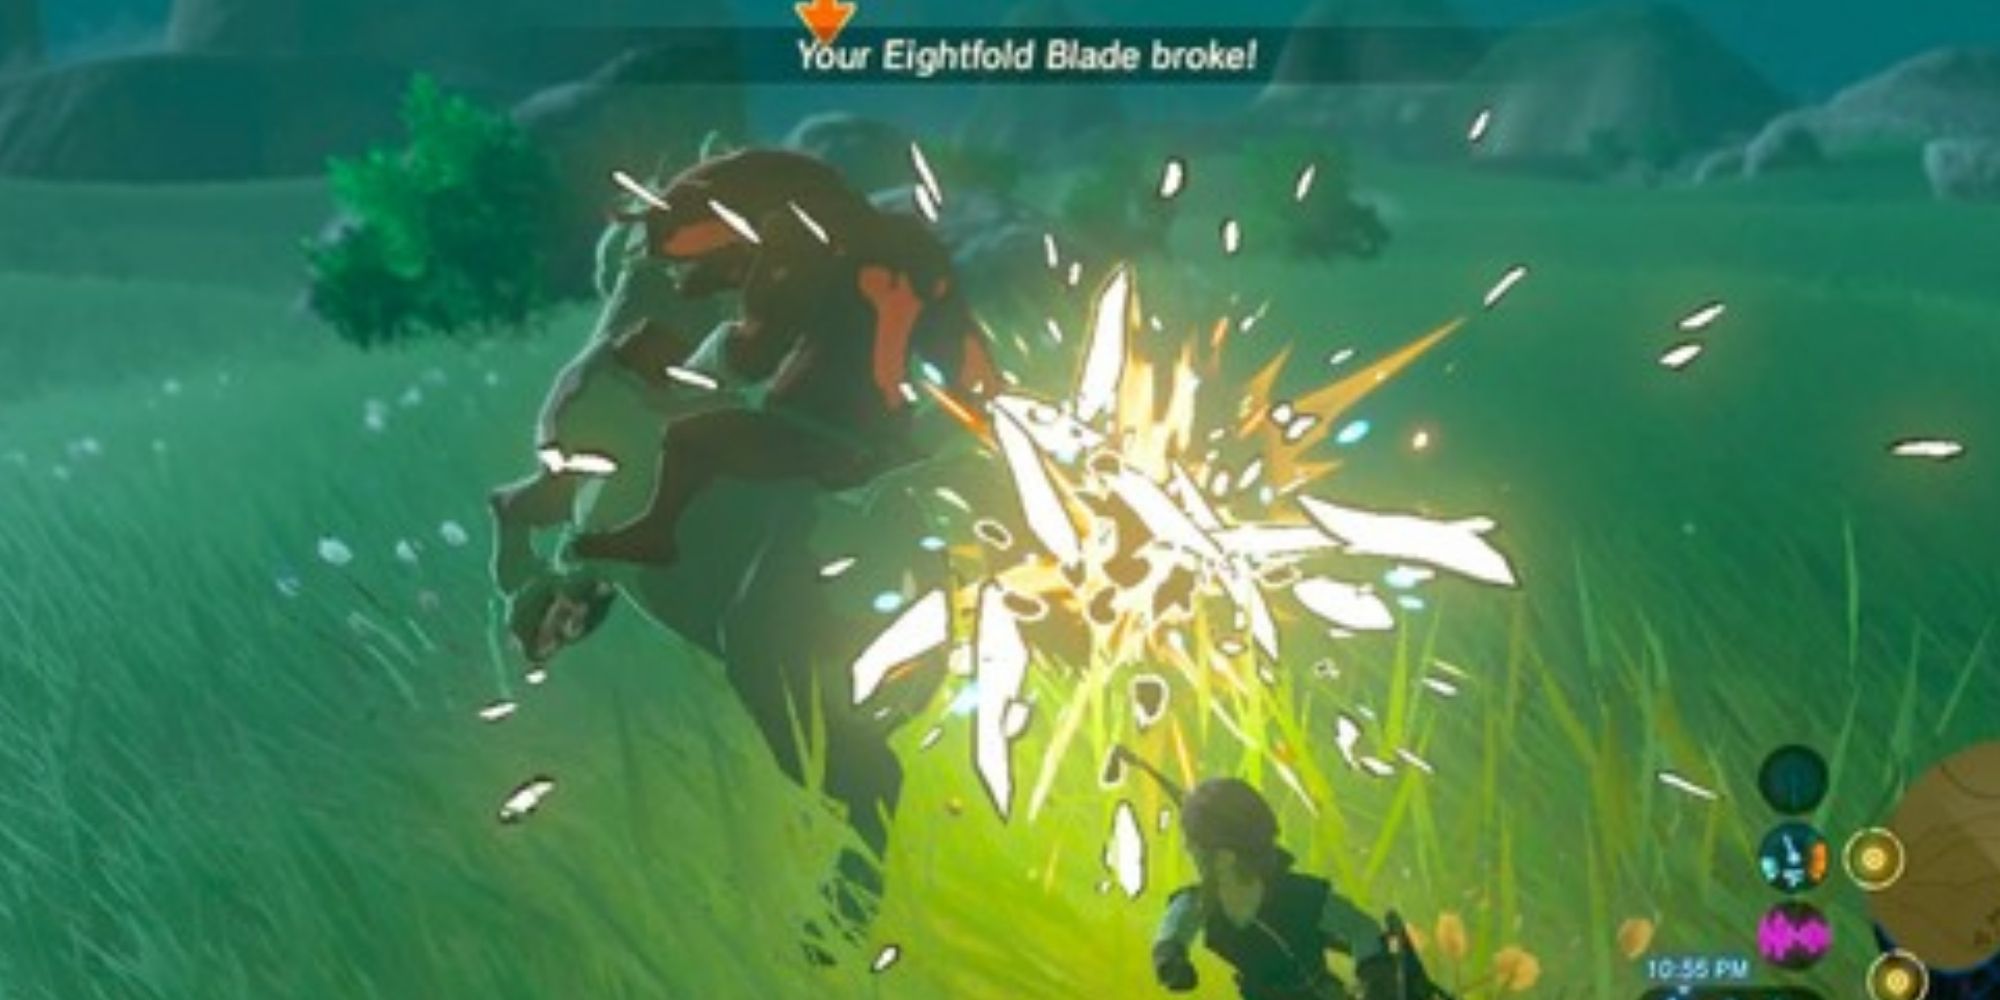 Link throwing a damaged Eightfold Blade at a Hinox in Breath of the Wild.